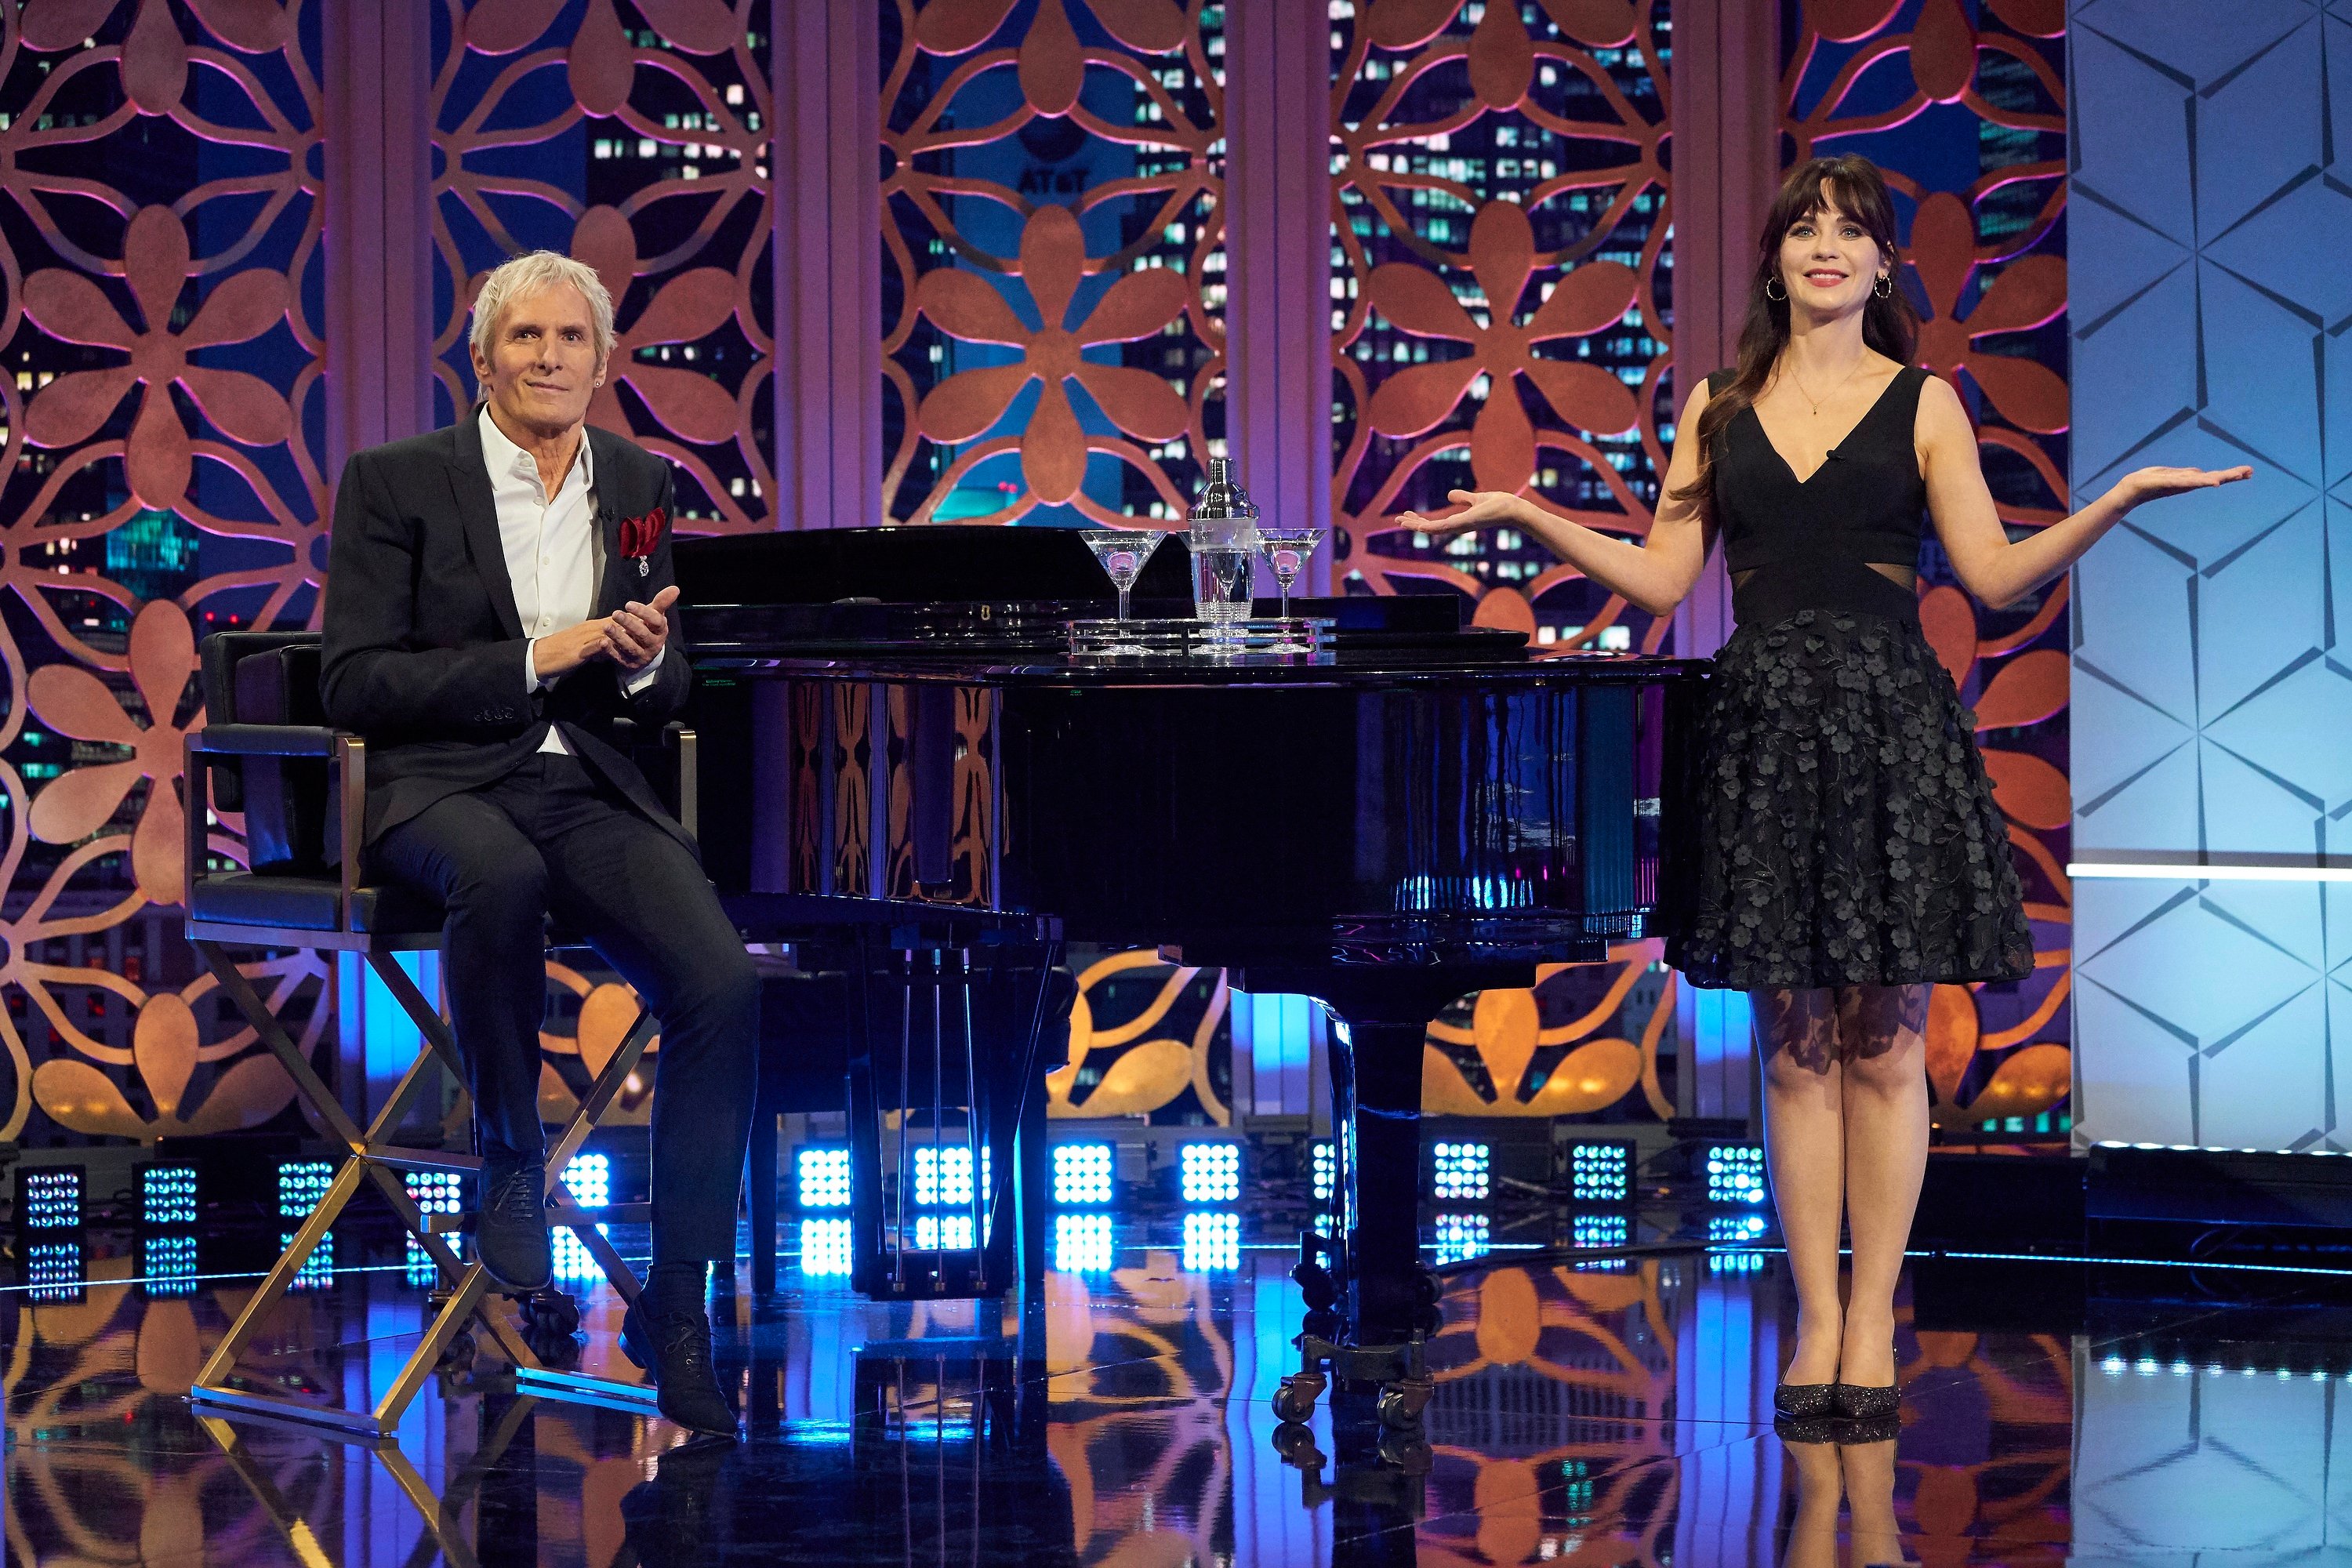 The Celebrity Dating Game Episode 2 with Michael Bolton and Zooey Deschanel